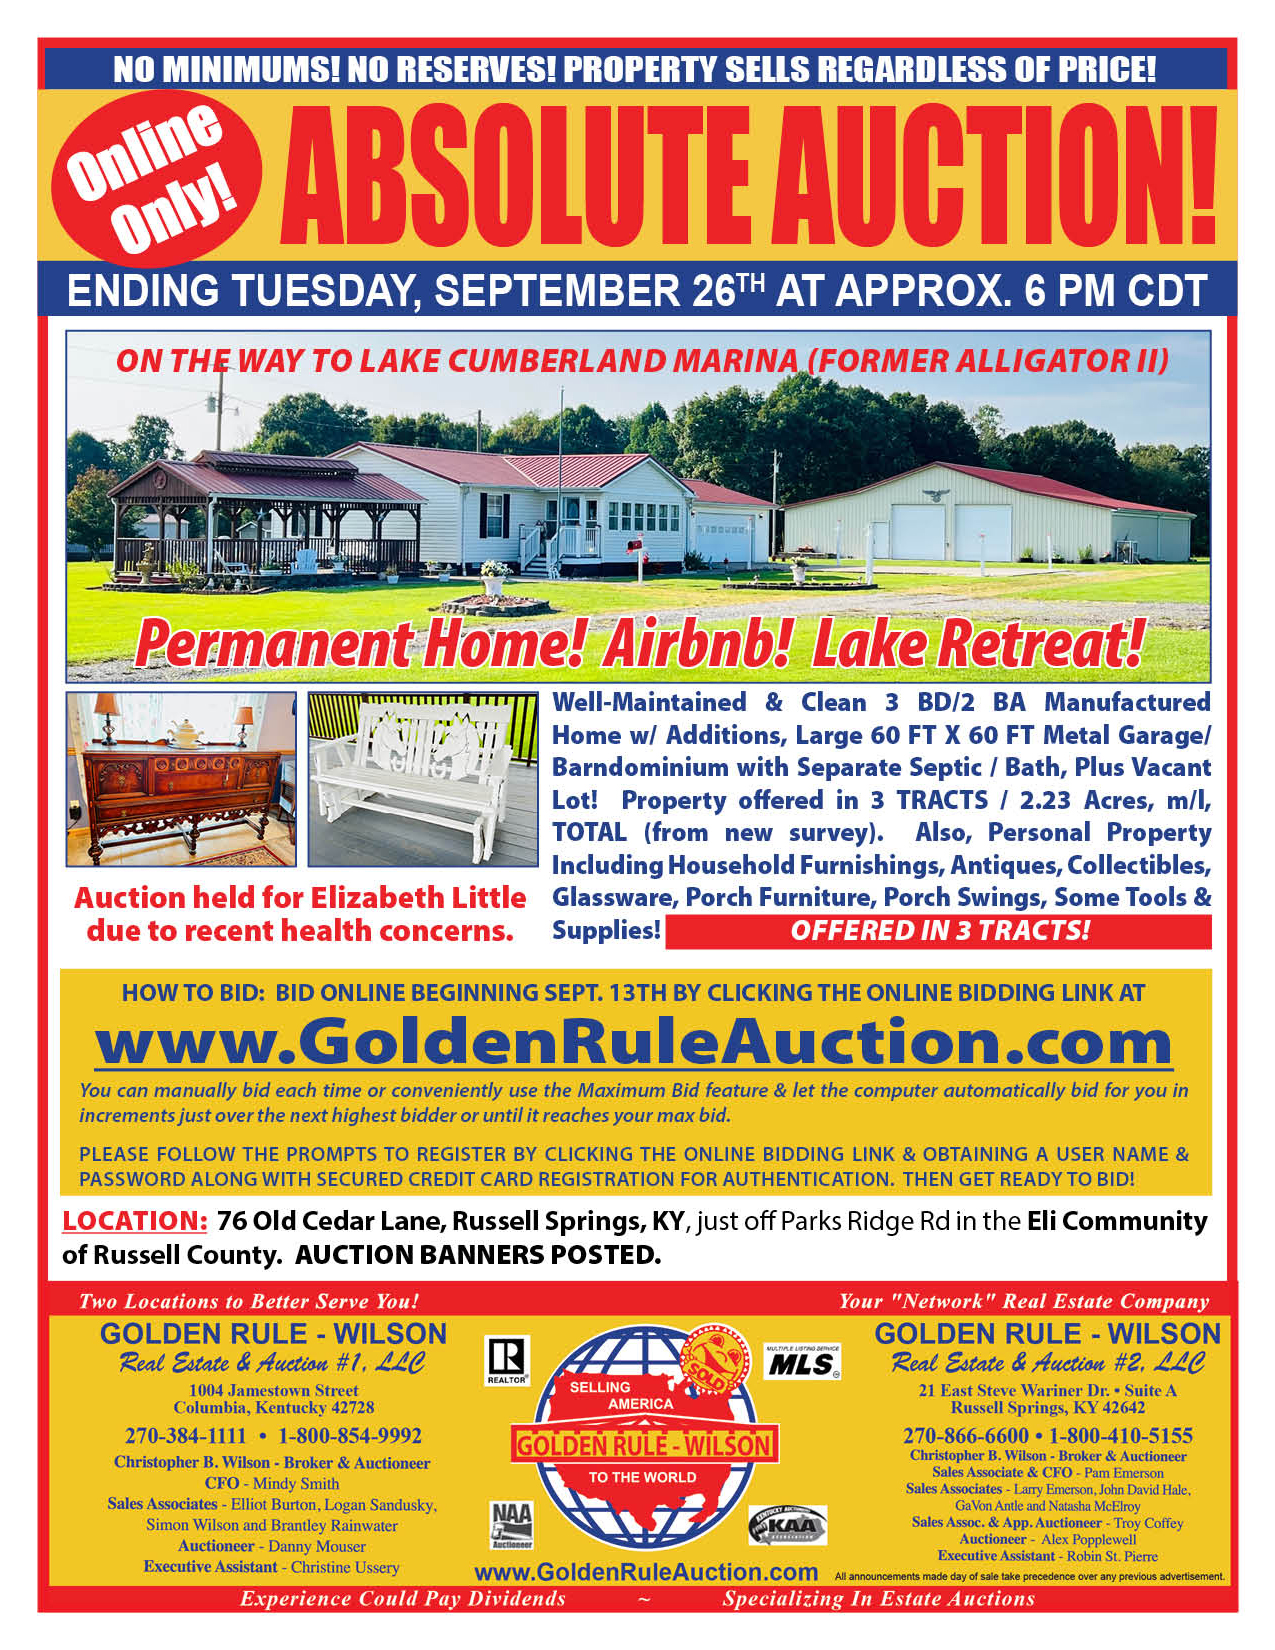 AUCTION BEGINS 9/13/23 and ENDS 9/26/23.  See terms online at www.GoldenRuleAuction.com